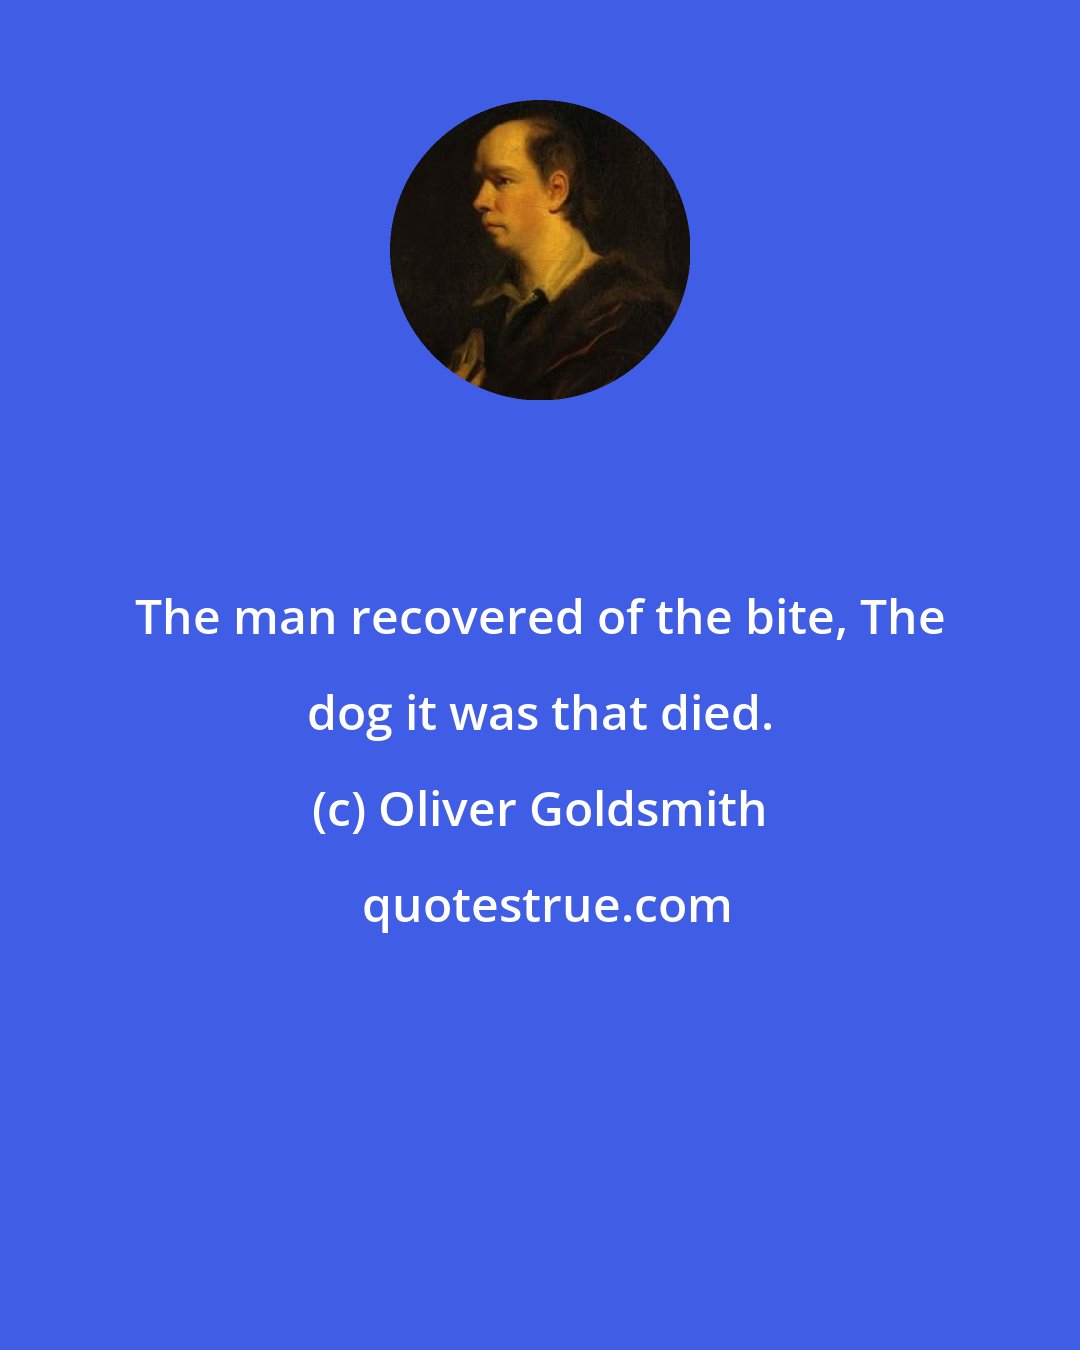 Oliver Goldsmith: The man recovered of the bite, The dog it was that died.